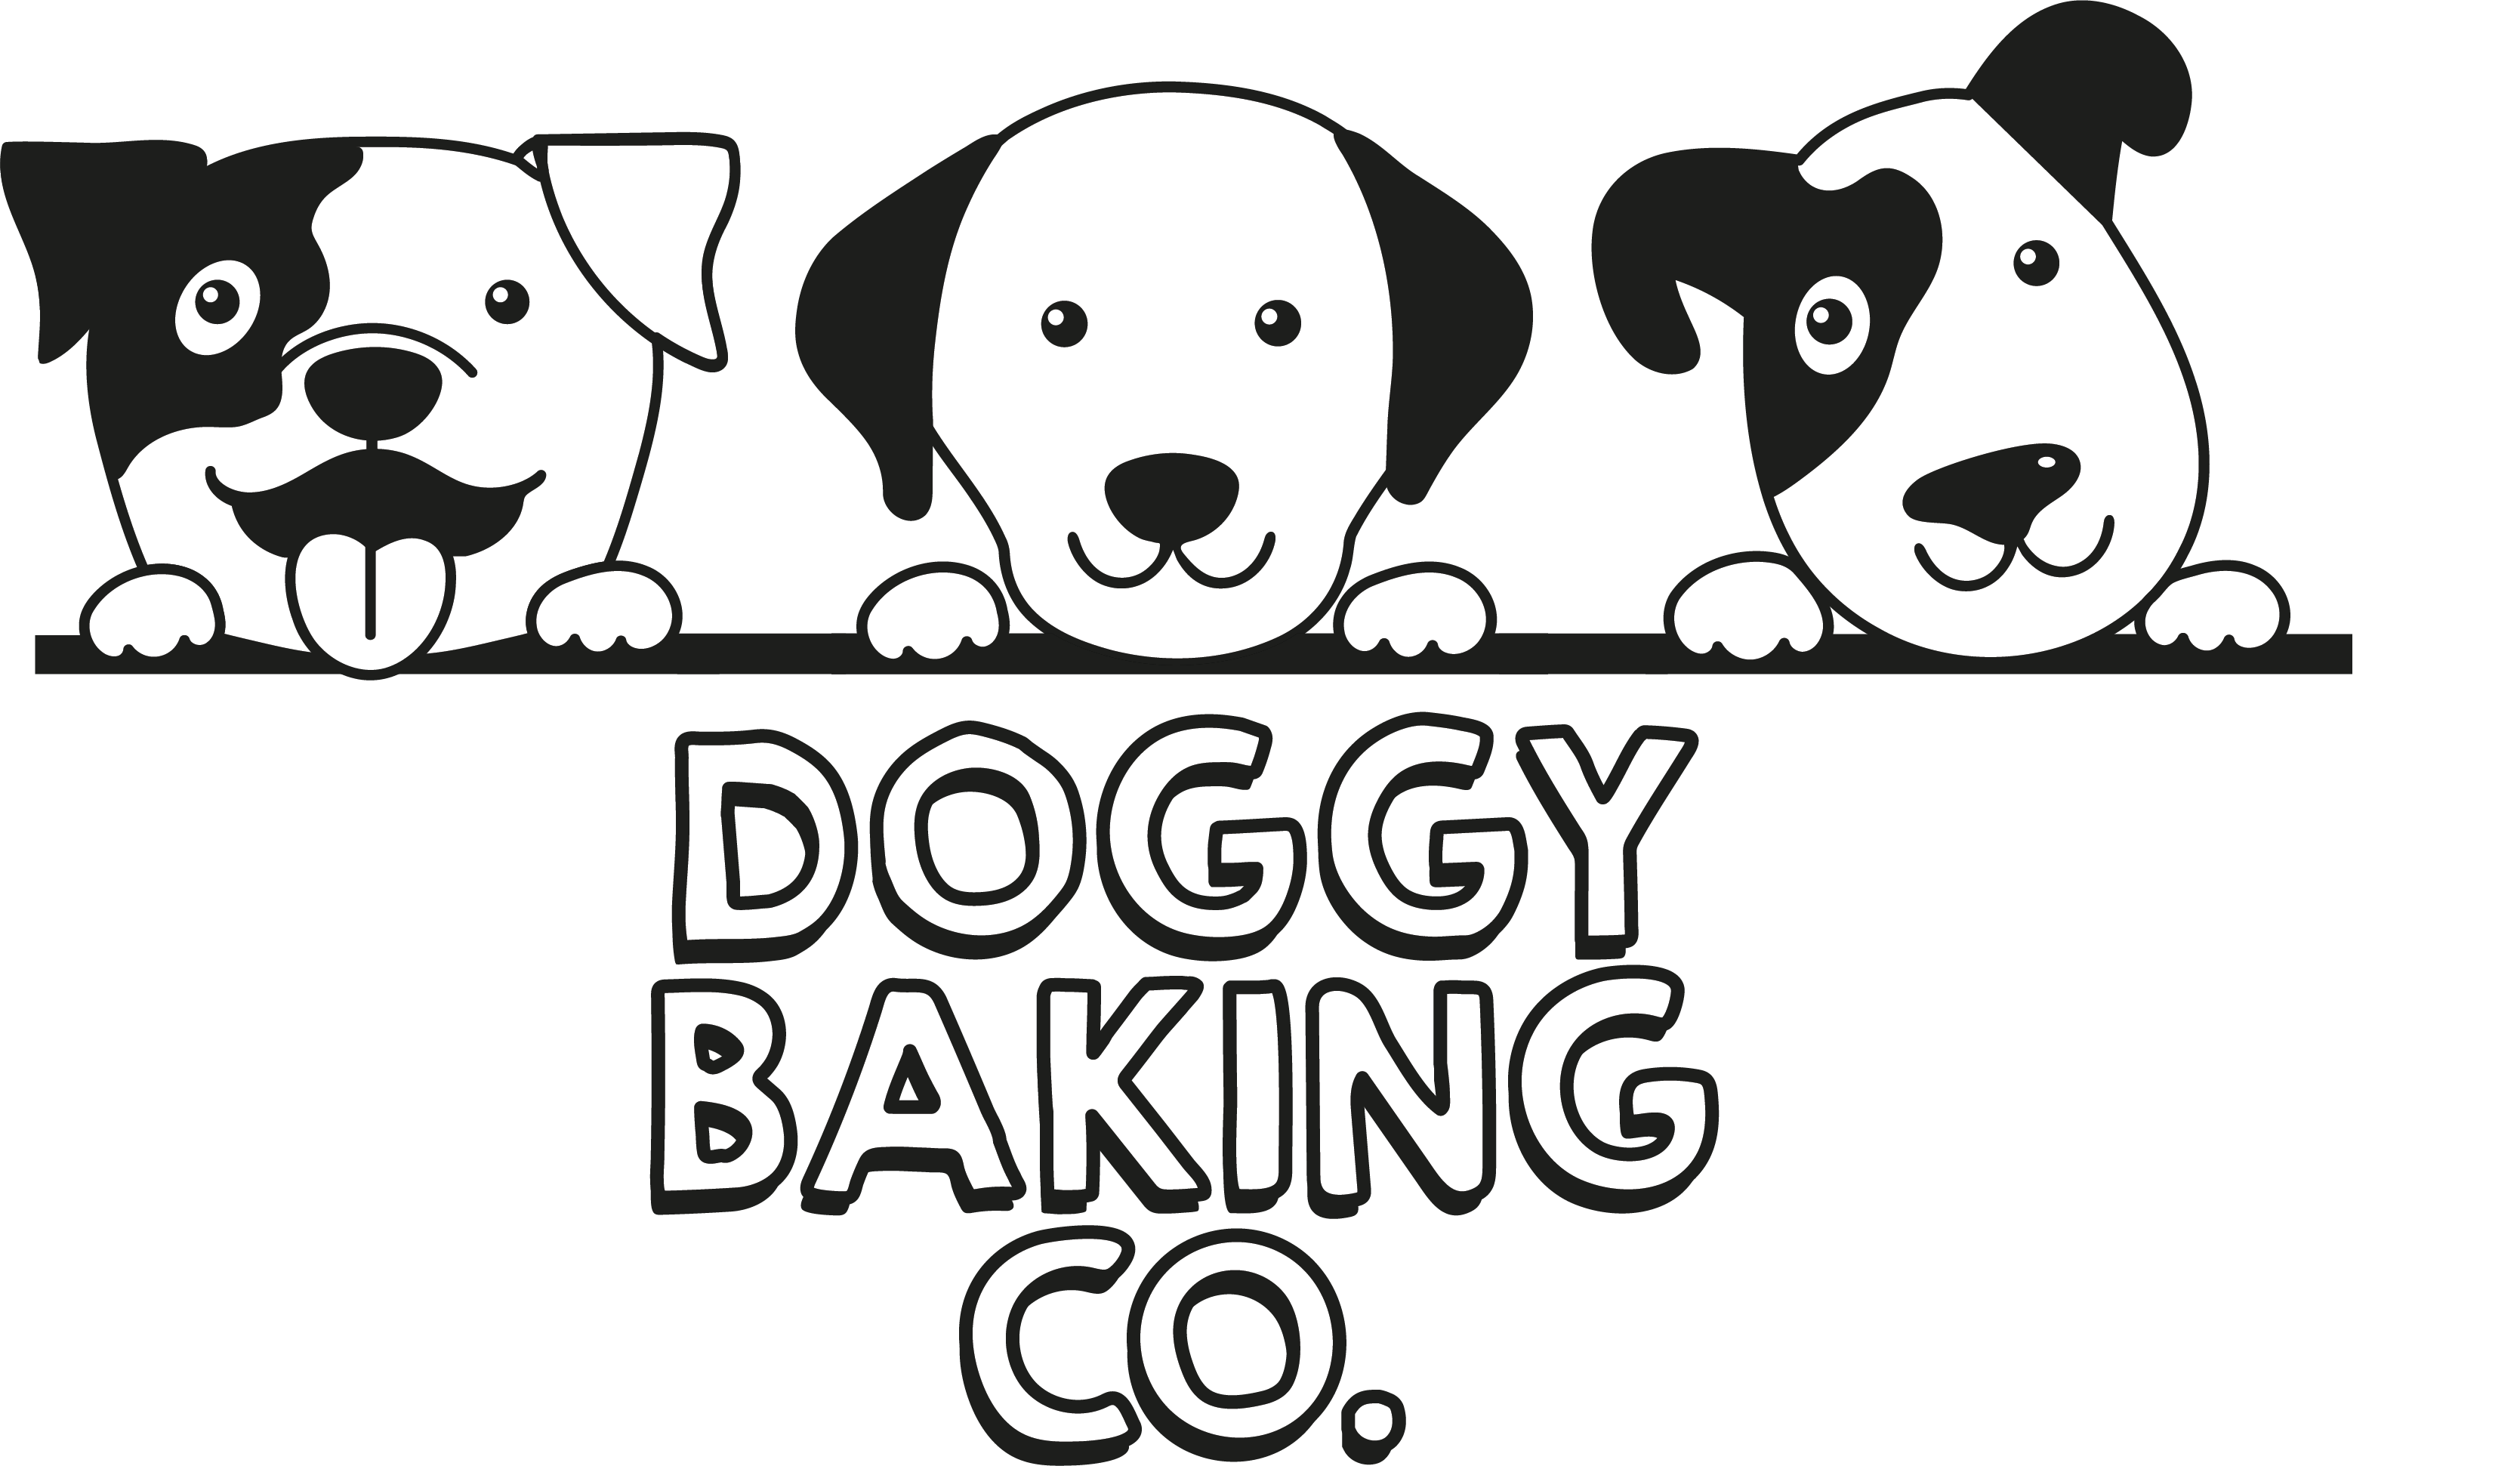 Doggy Baking Co by The Bottled Baking Co